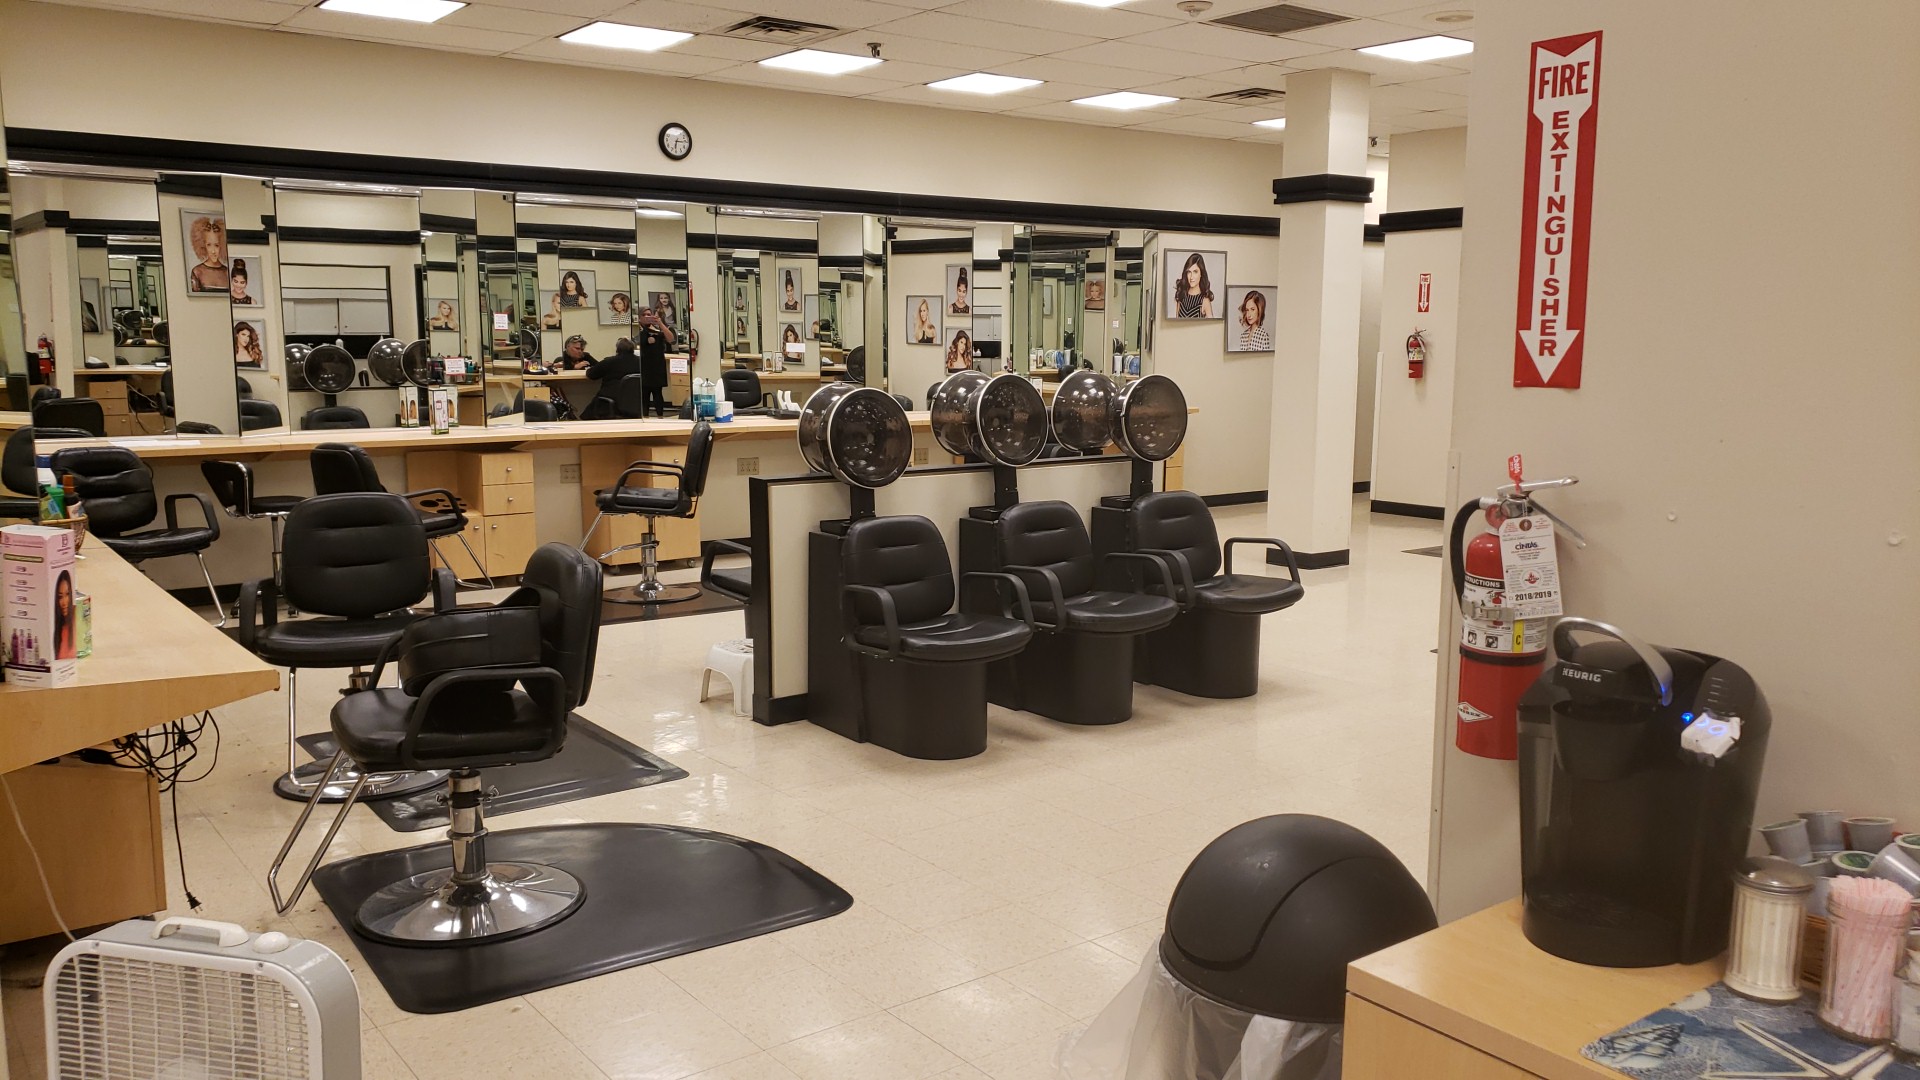 The SALON by InStyle Inside JCPenney